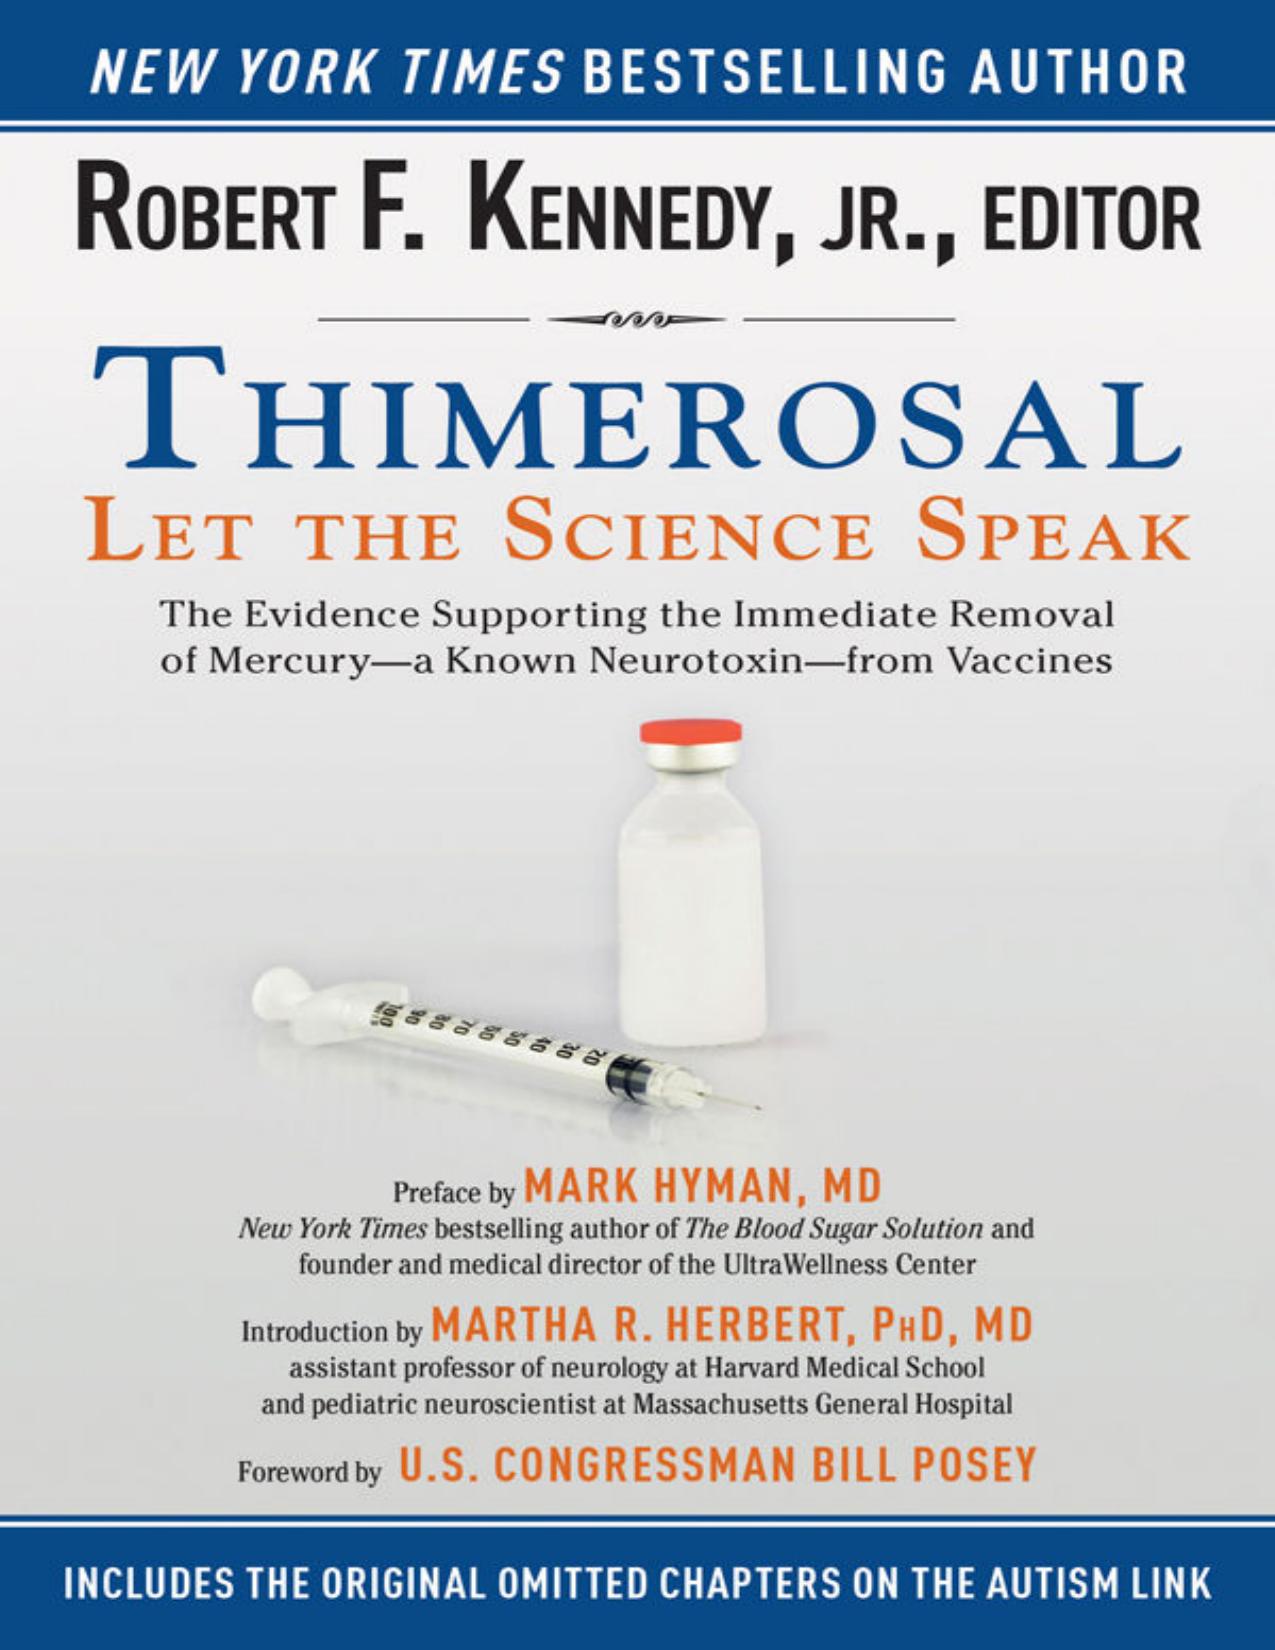 Thimerosal: Let the Science Speak: The Evidence Supporting the Immediate Removal of Mercury - ­a Known Neurotoxin - From Vaccines [2015]